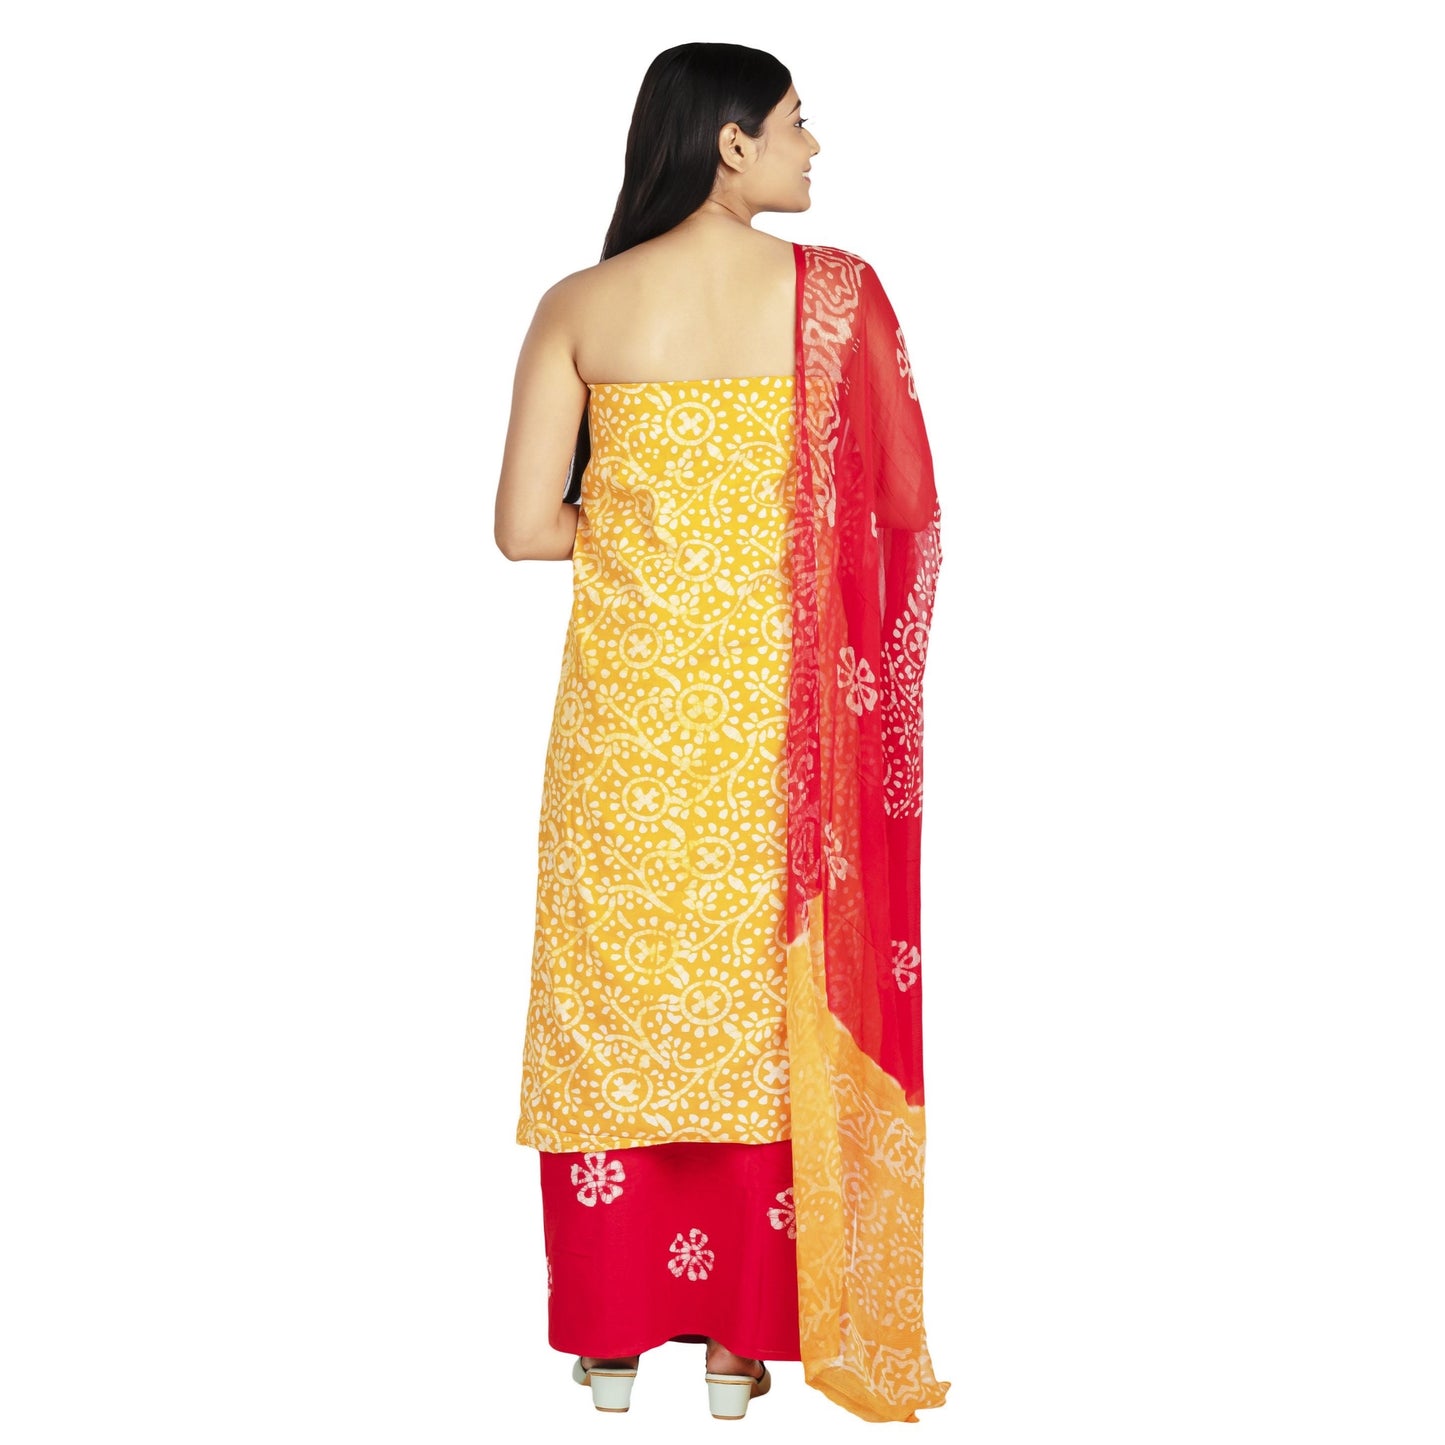 yellow cotton top with embroidery and white print , red bottom with white print, chiffon dupatta in red and yellow